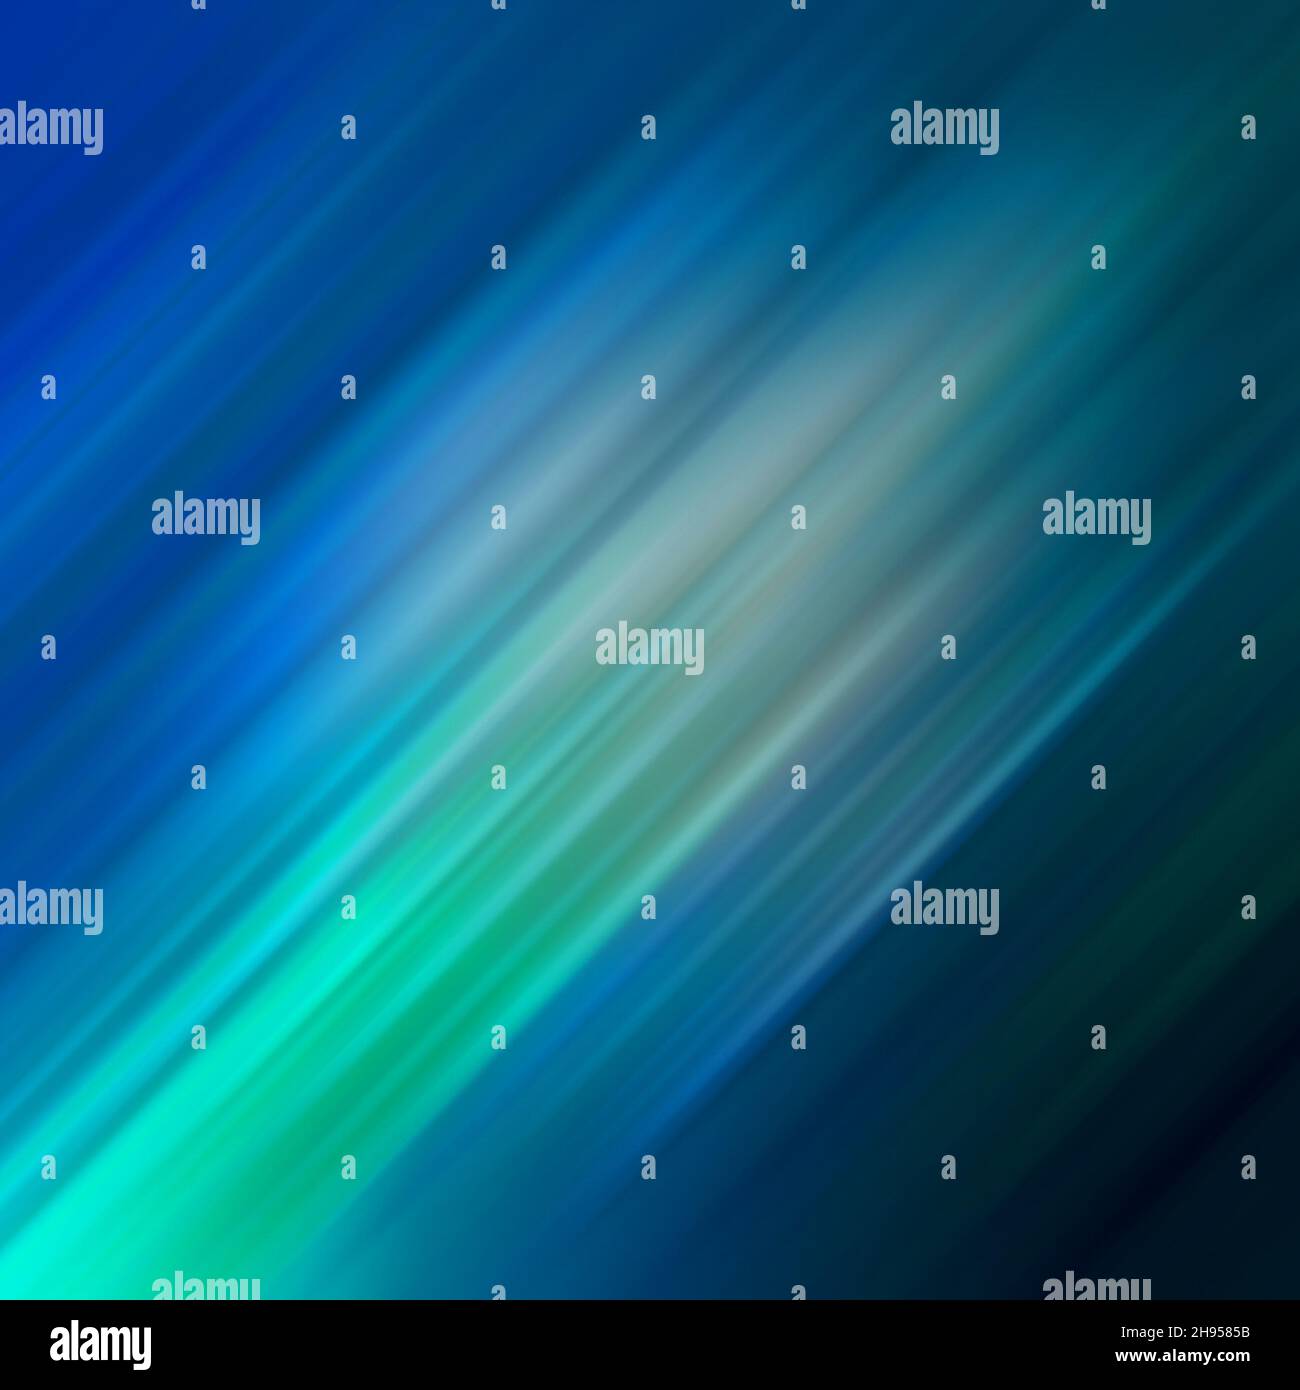 Diagonal Multi Color Gradient Background. Abstract background with vibrant diagonal stripes. Concept graphic of colorful light in dynamic motion. Mix Stock Photo